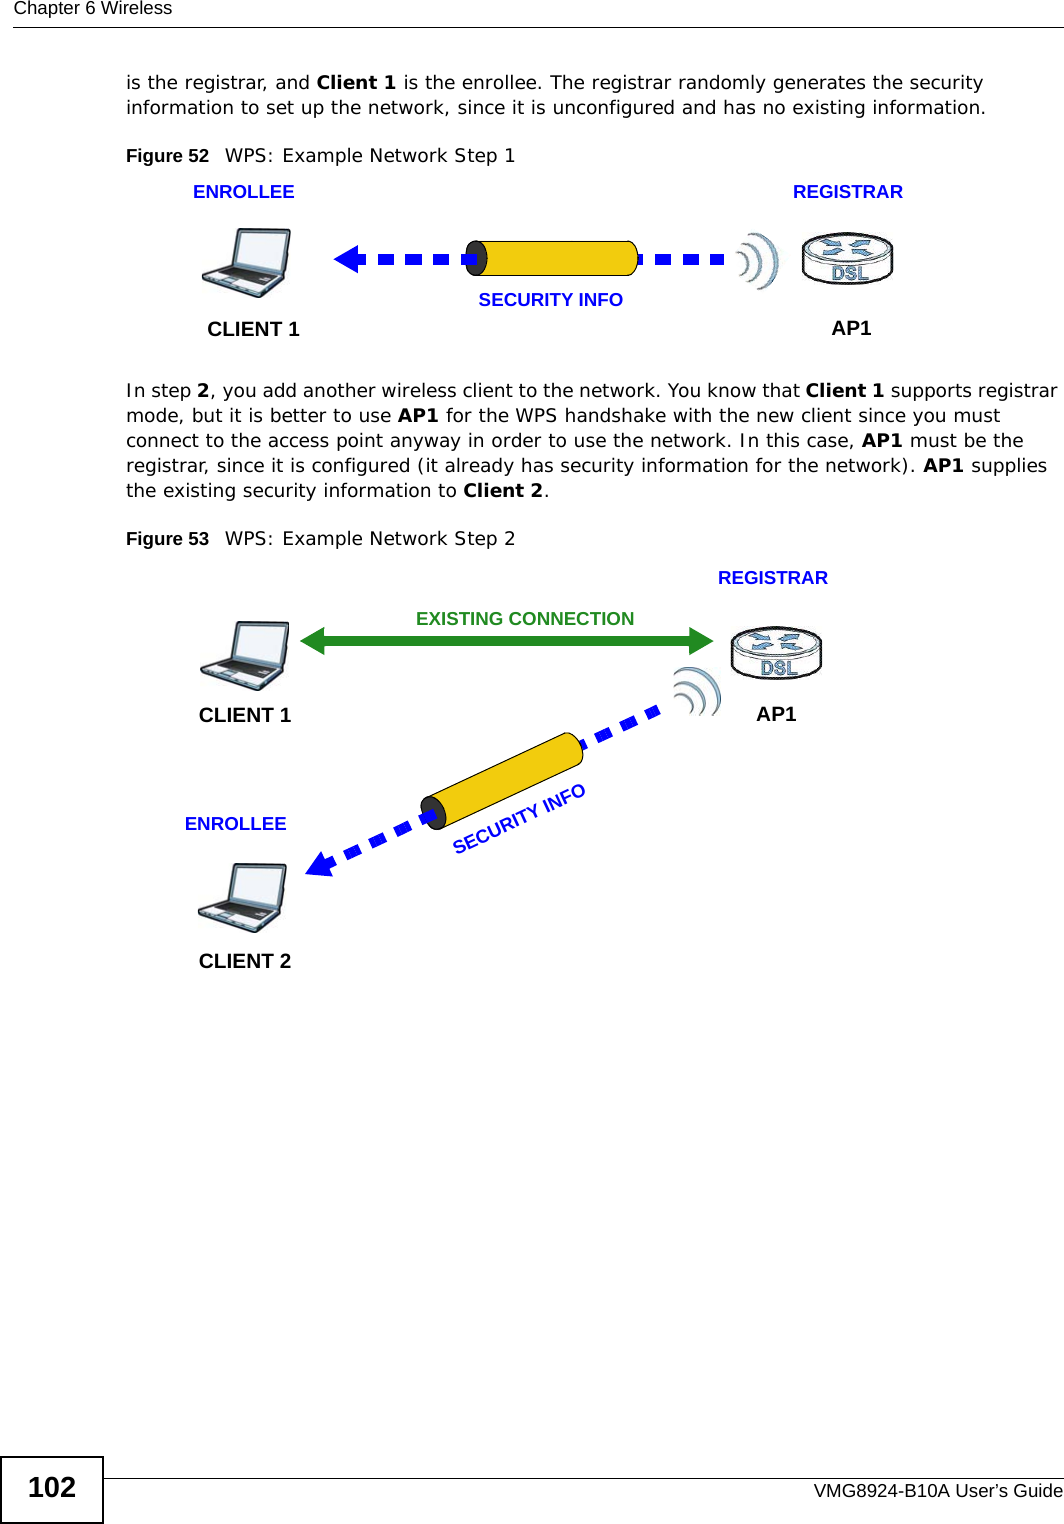 Chapter 6 WirelessVMG8924-B10A User’s Guide102is the registrar, and Client 1 is the enrollee. The registrar randomly generates the security information to set up the network, since it is unconfigured and has no existing information.Figure 52   WPS: Example Network Step 1In step 2, you add another wireless client to the network. You know that Client 1 supports registrar mode, but it is better to use AP1 for the WPS handshake with the new client since you must connect to the access point anyway in order to use the network. In this case, AP1 must be the registrar, since it is configured (it already has security information for the network). AP1 supplies the existing security information to Client 2.Figure 53   WPS: Example Network Step 2REGISTRARENROLLEESECURITY INFOCLIENT 1 AP1REGISTRARCLIENT 1 AP1ENROLLEECLIENT 2EXISTING CONNECTIONSECURITY INFO